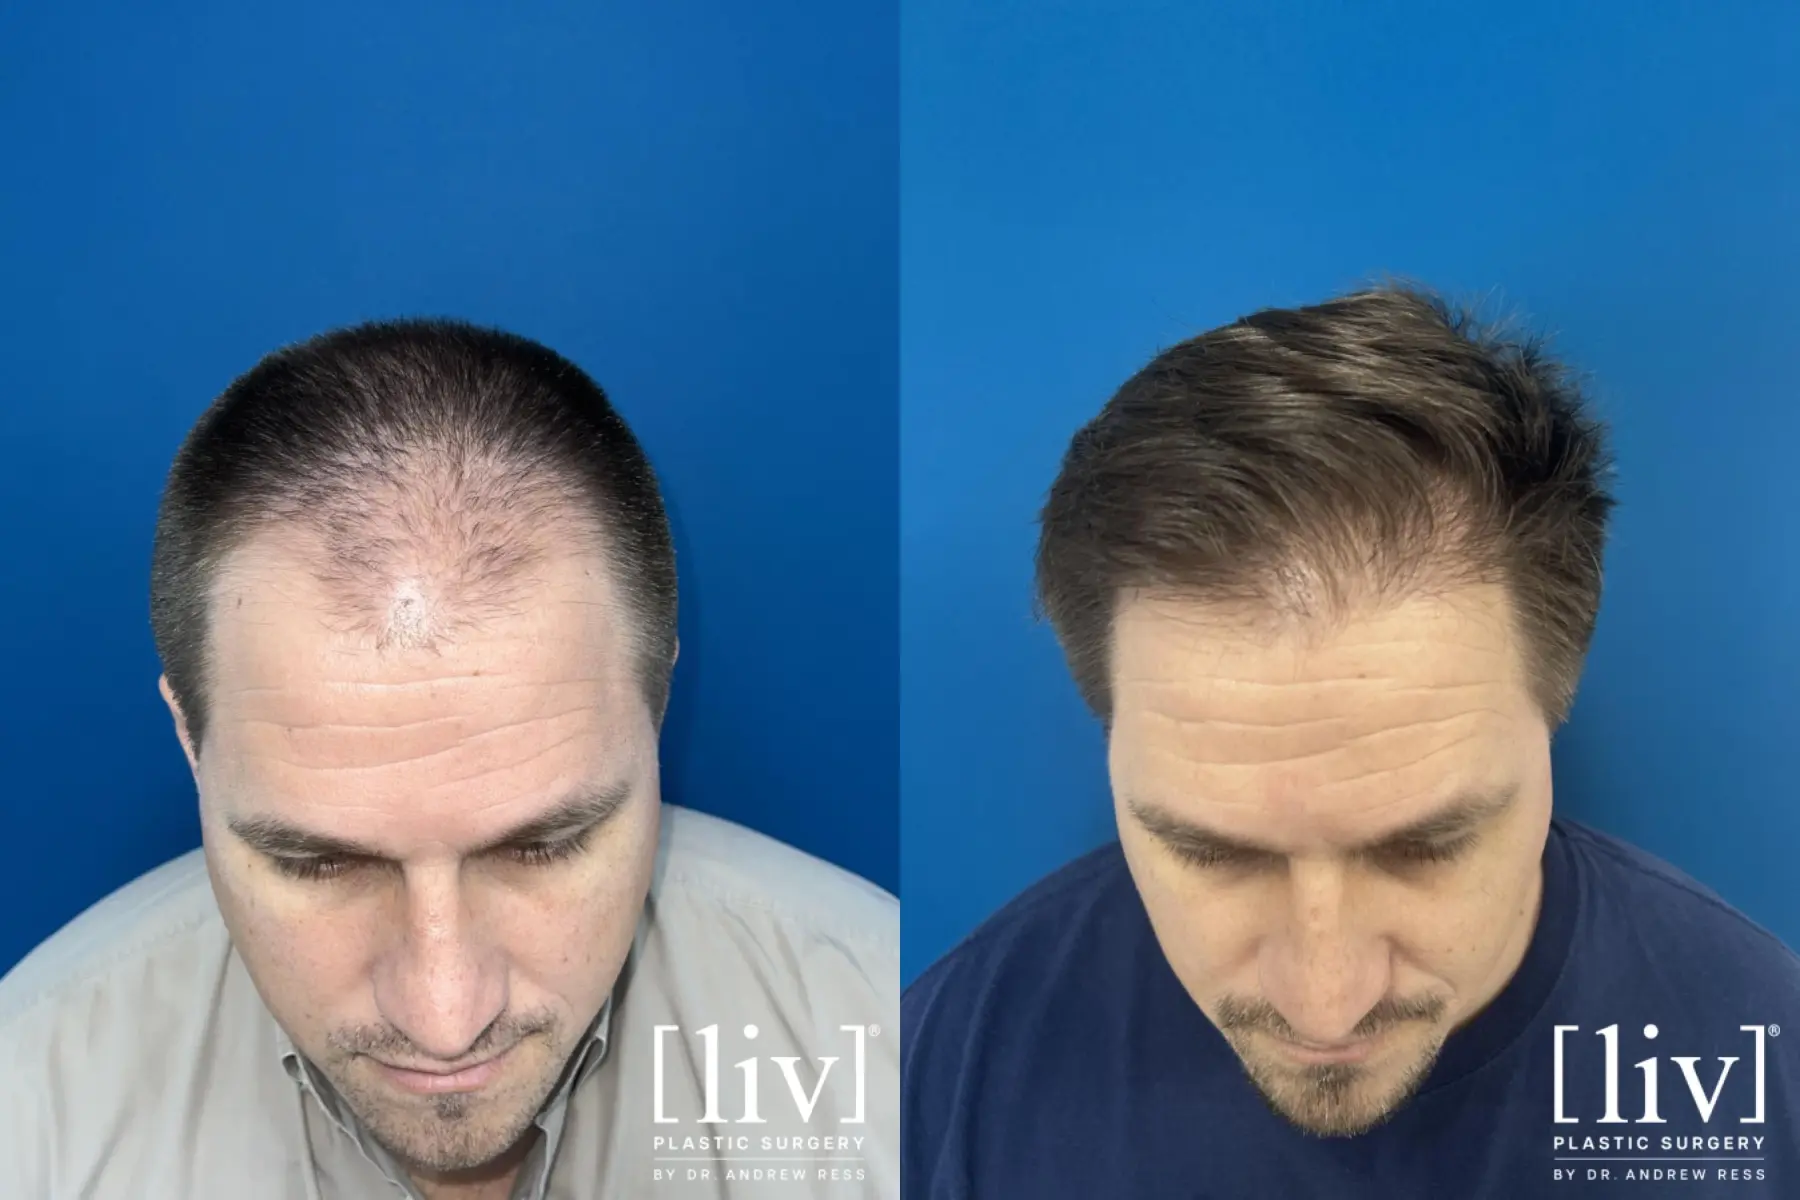 Hair Transplantation: Patient 2 - Before and After  